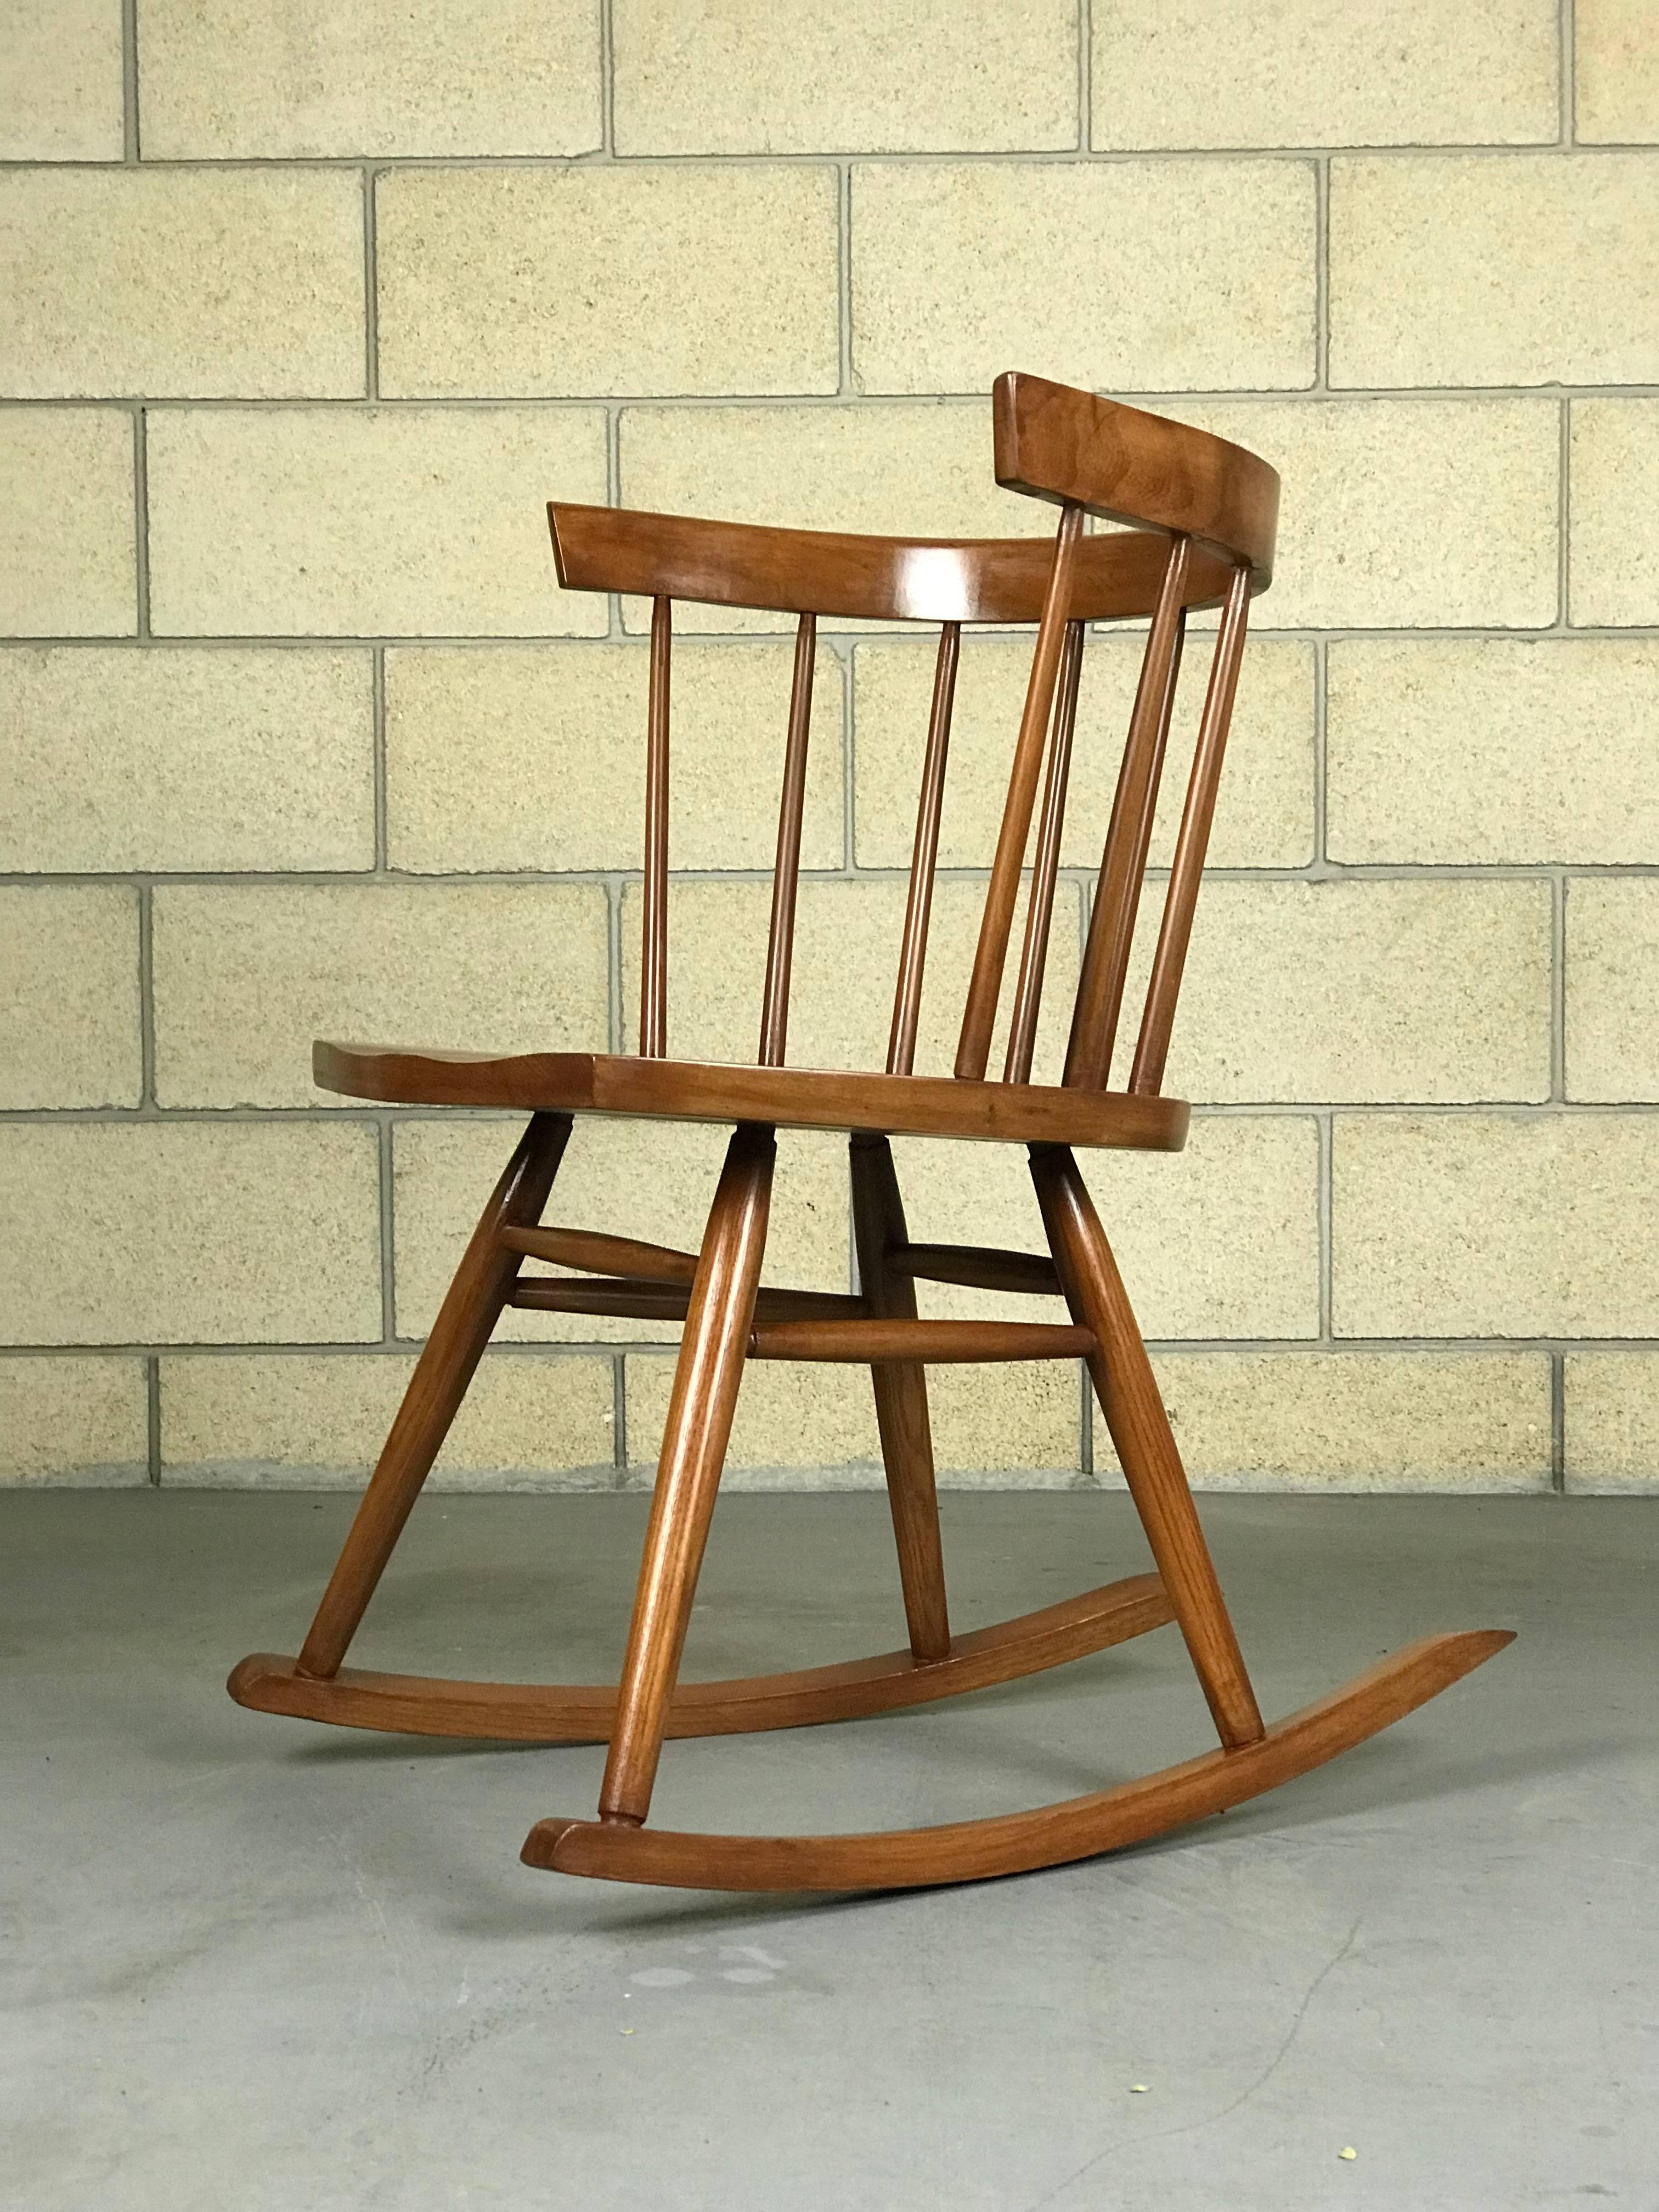 Minimalist windsor style rocker by Ercol Furniture of England; refinished, circa 1950s. This has been used since refinishing and shows some very minor wear. Studio lighting brightens the color. It's a walnut stain and satin finish.